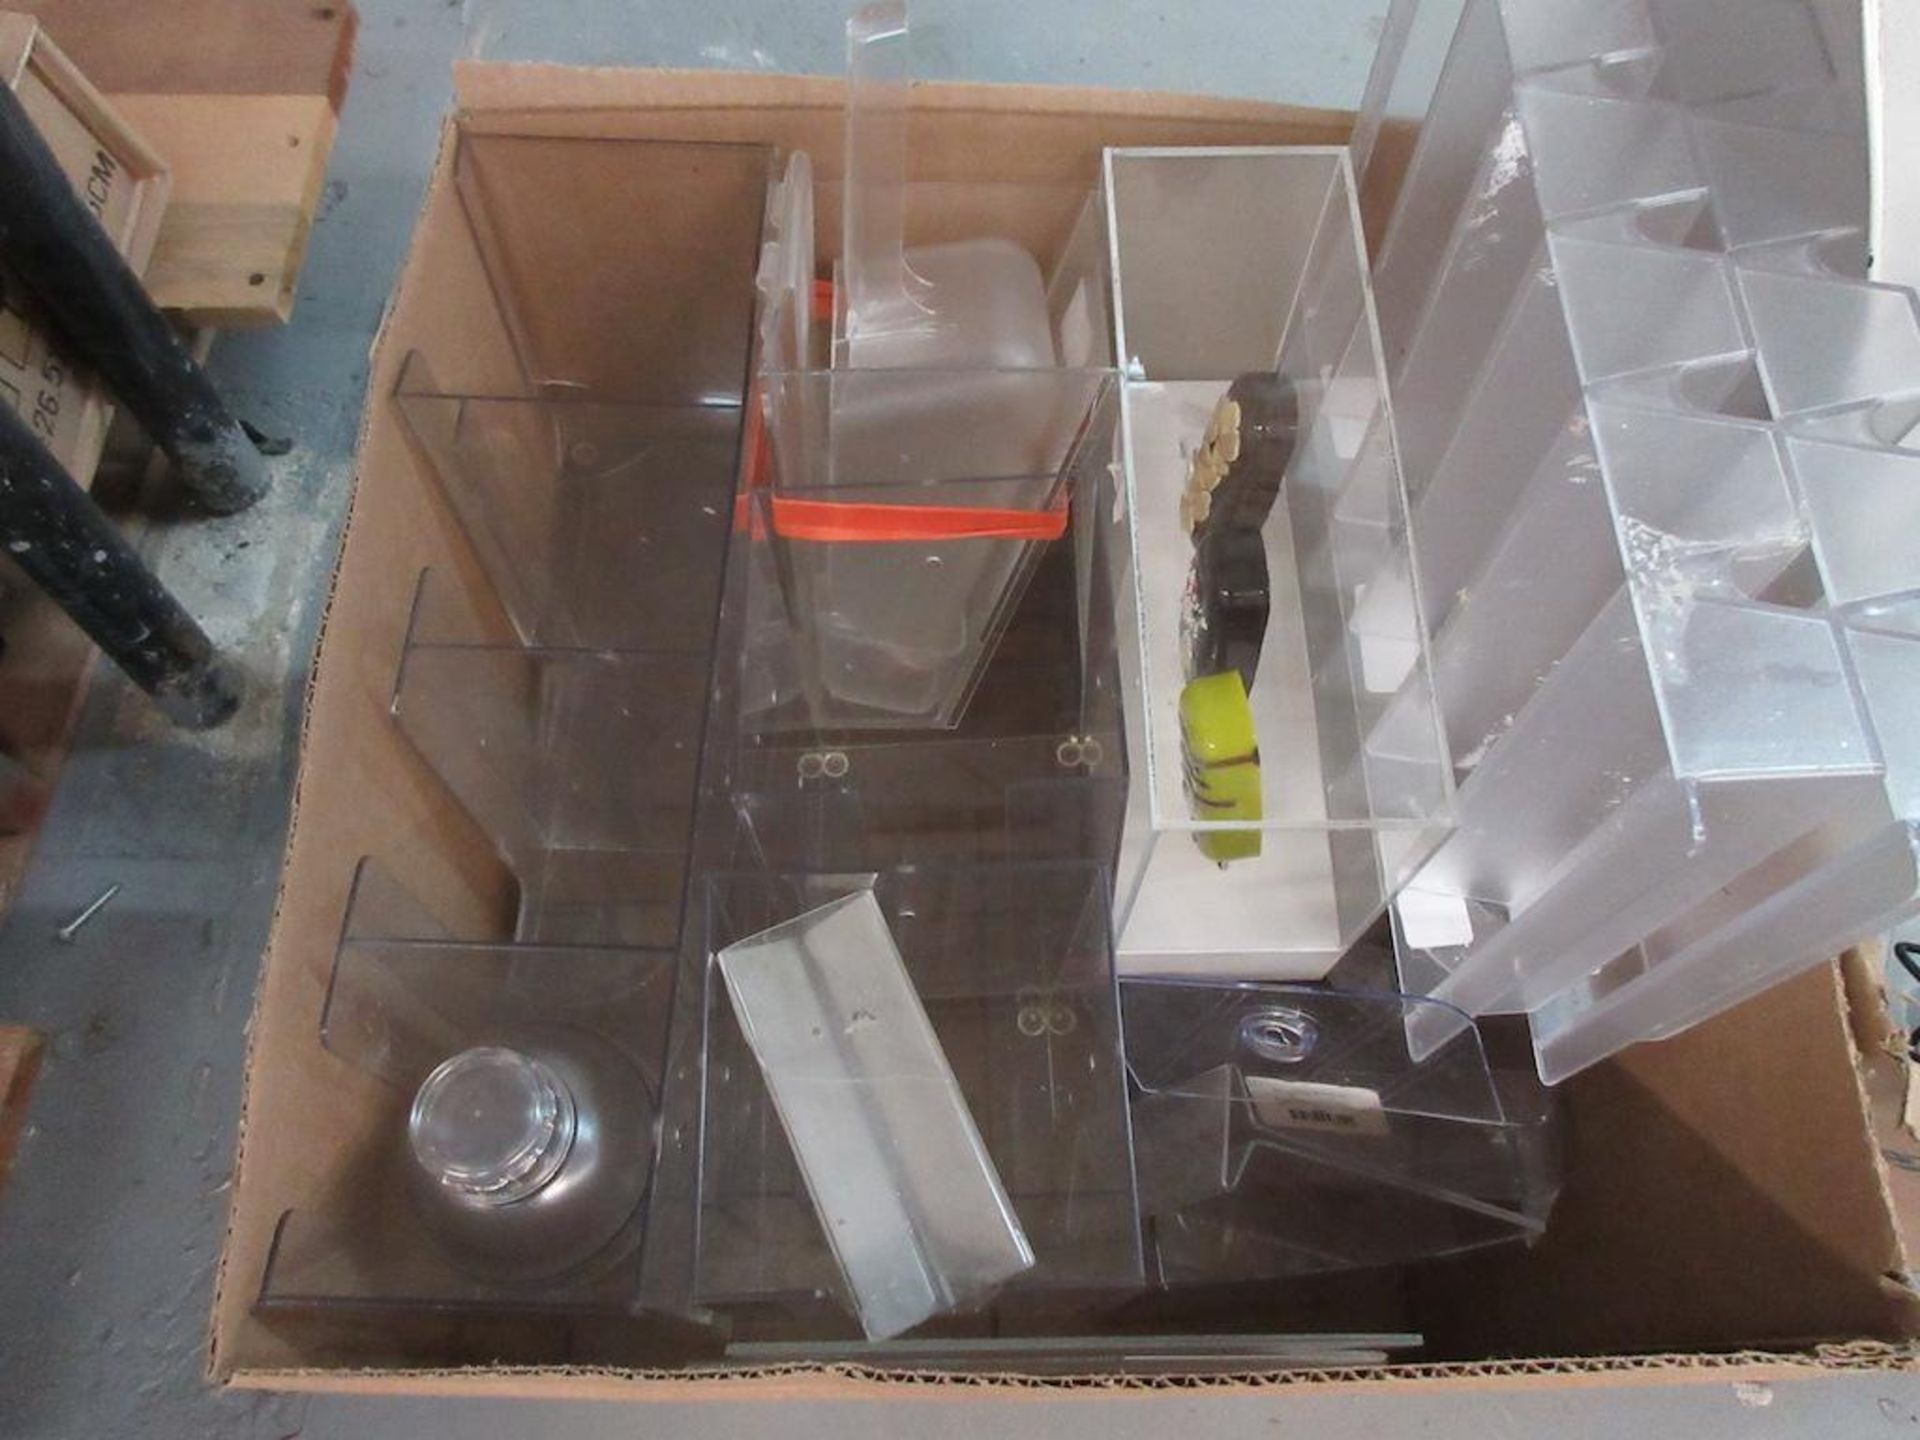 Lot 3 boxes: plastic containers, dishes, bowls etc. - Image 2 of 4